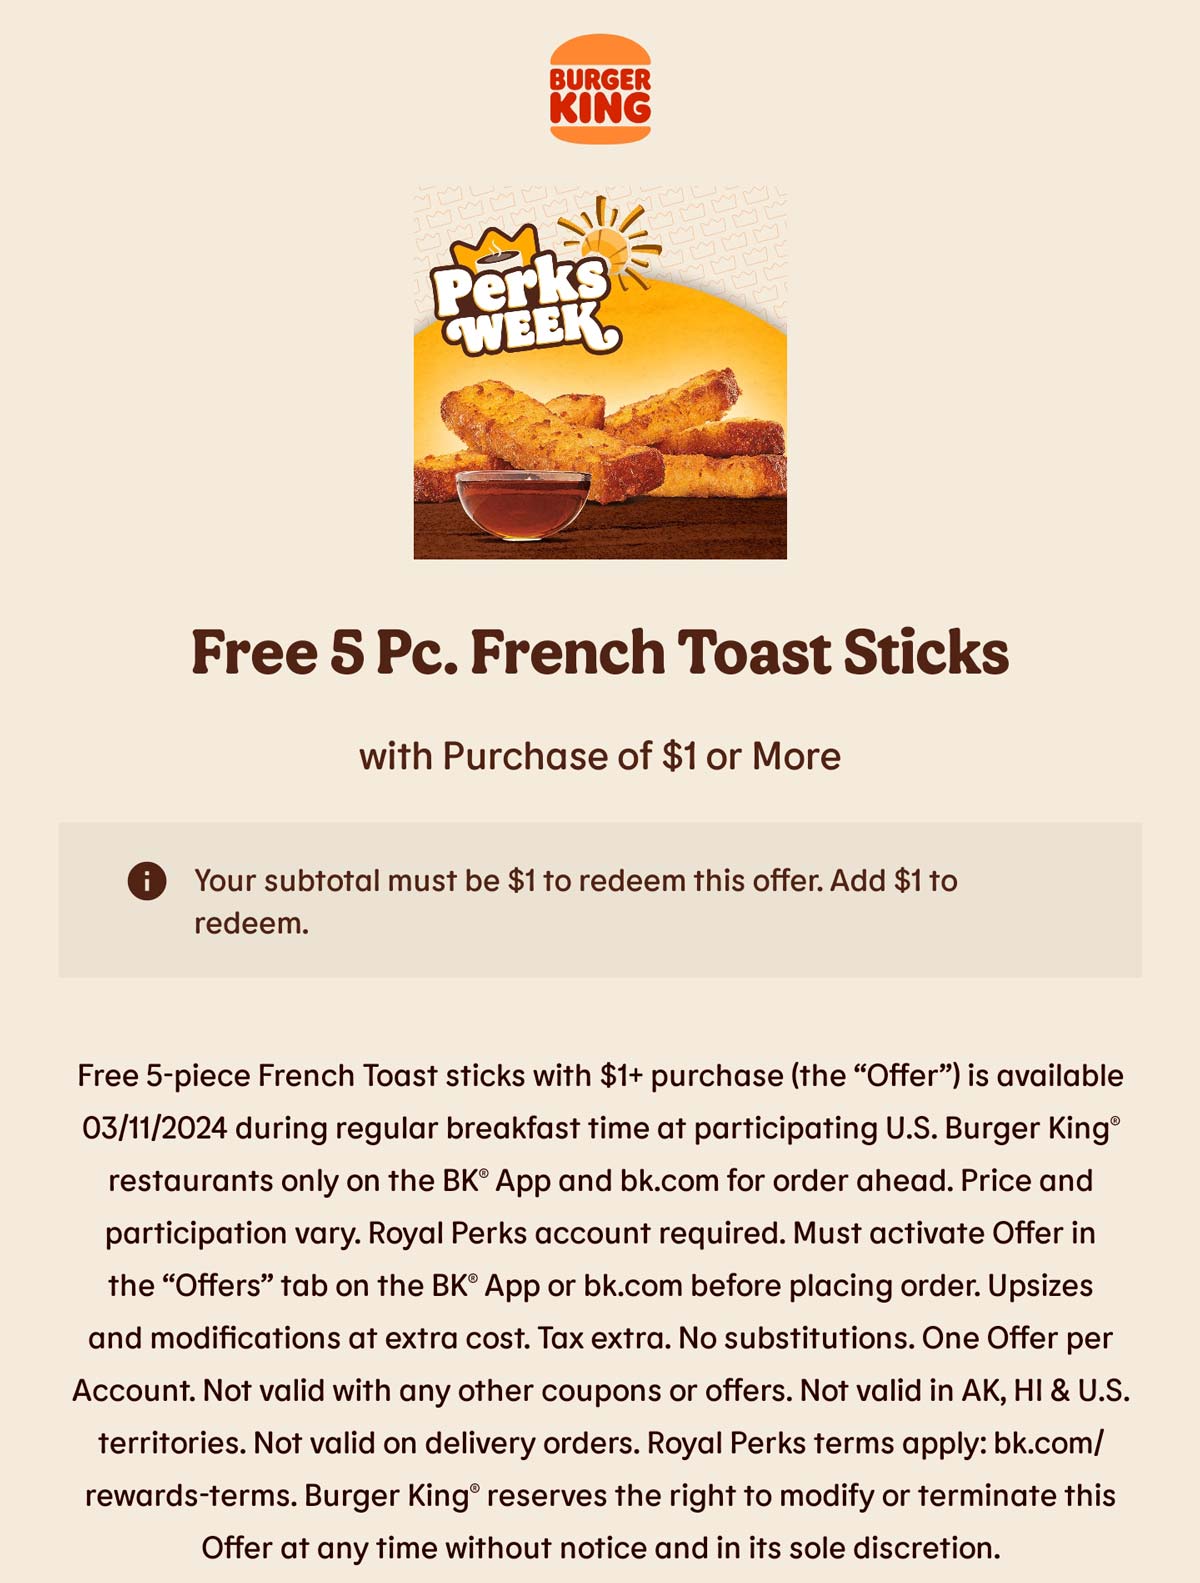 Burger King restaurants Coupon  Free 5pc french toast sticks on $1 today at Burger King restaurants #burgerking 